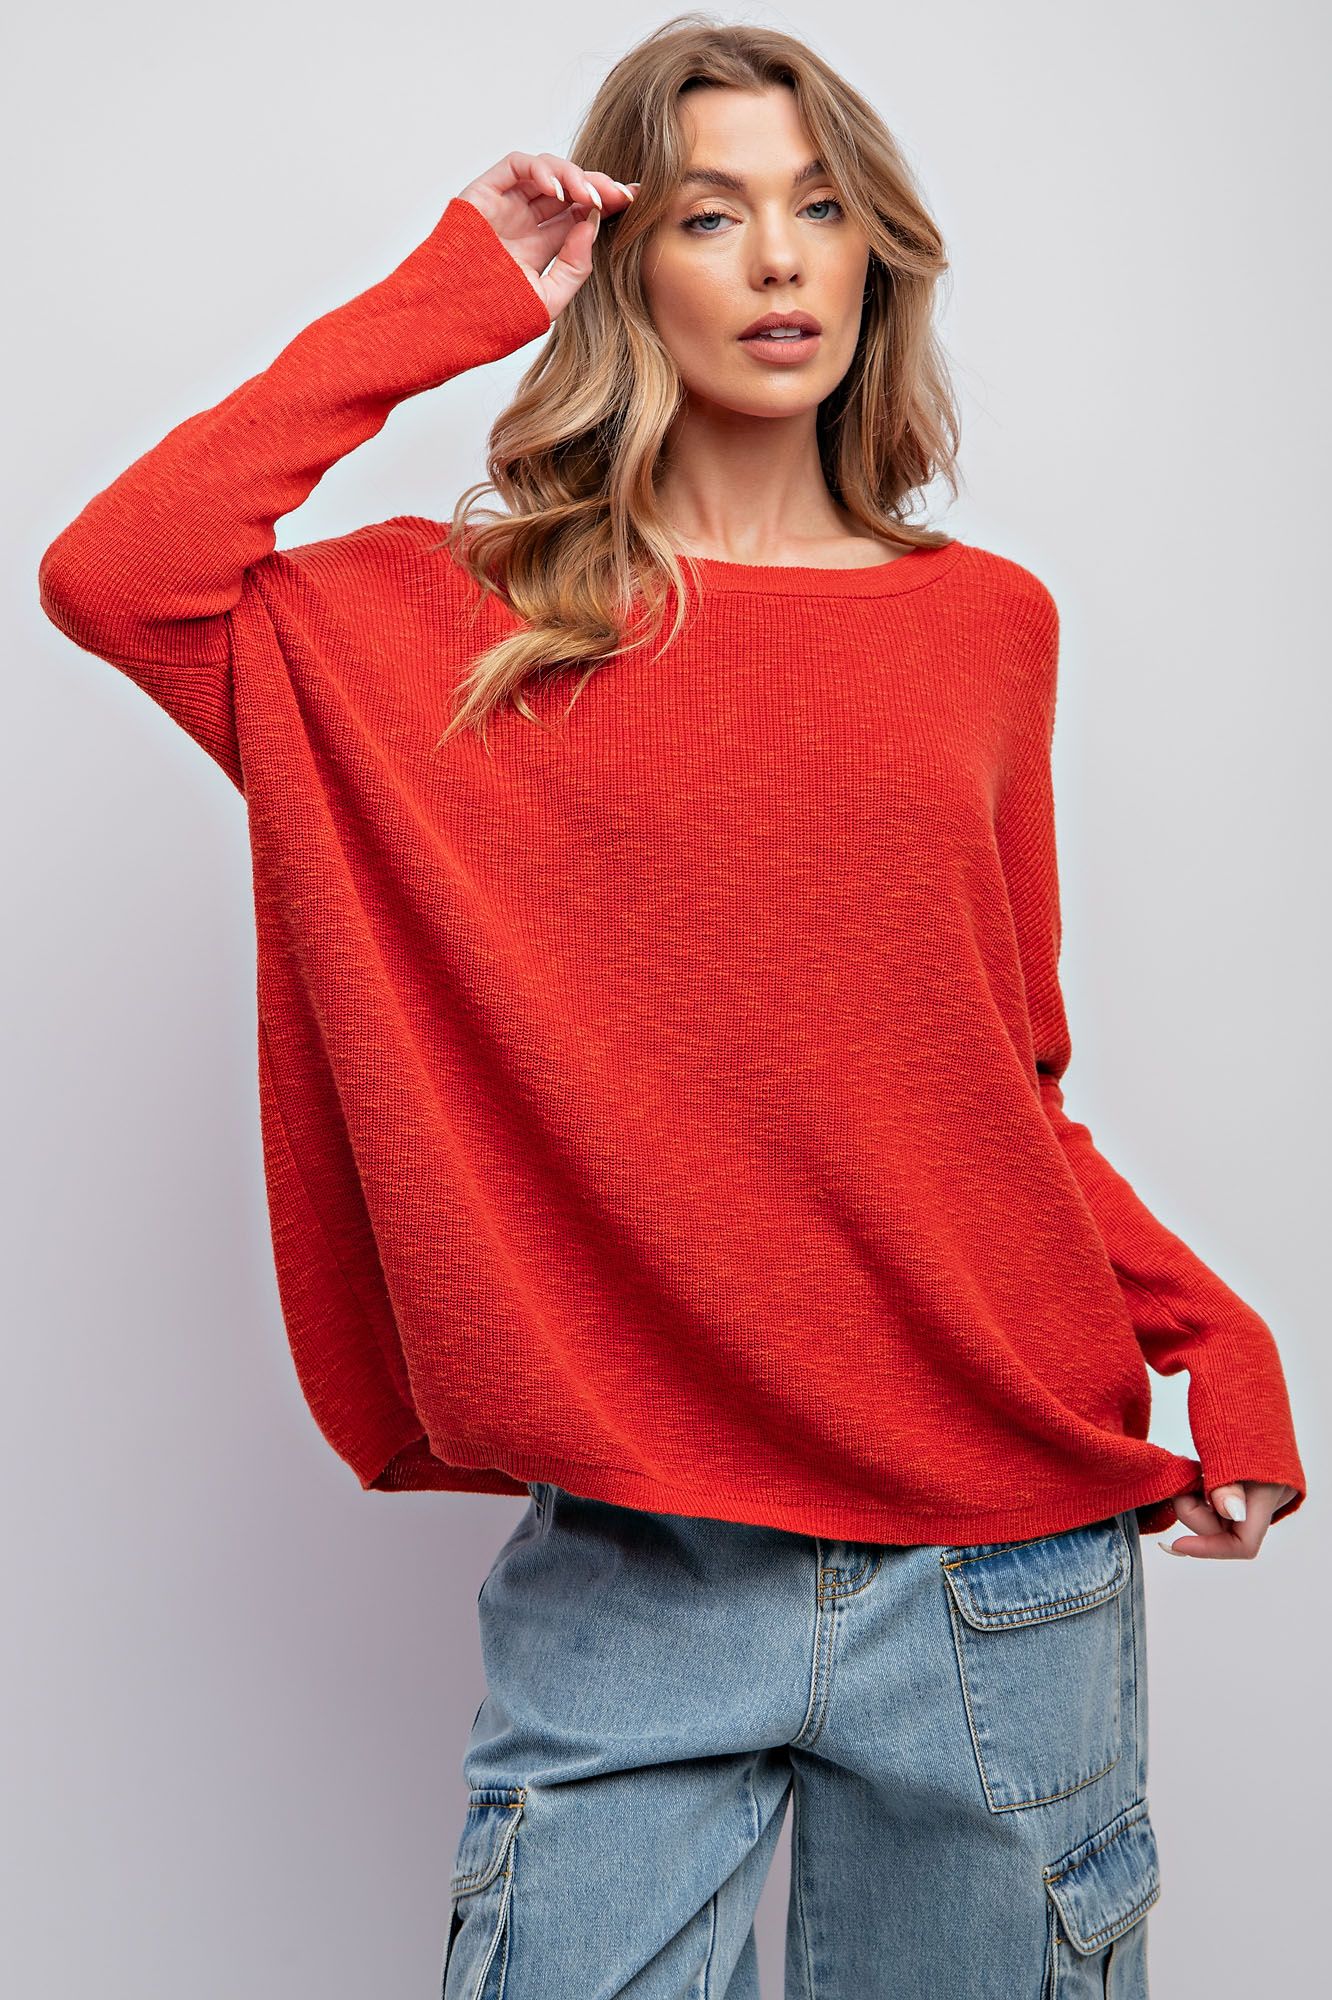 Easel Knitted Sweater Top Cherry Tomato